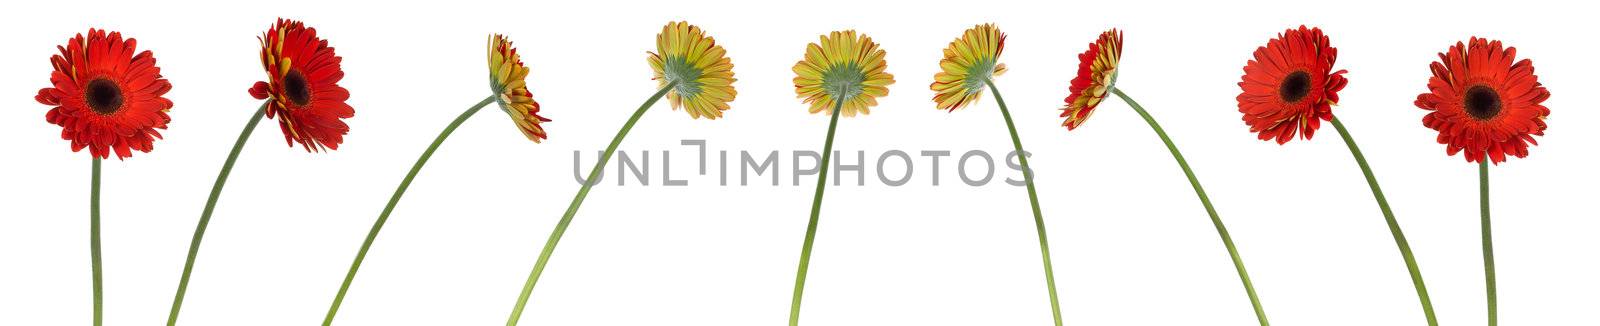 nine red gerbera flowers in different positions, isolated on white